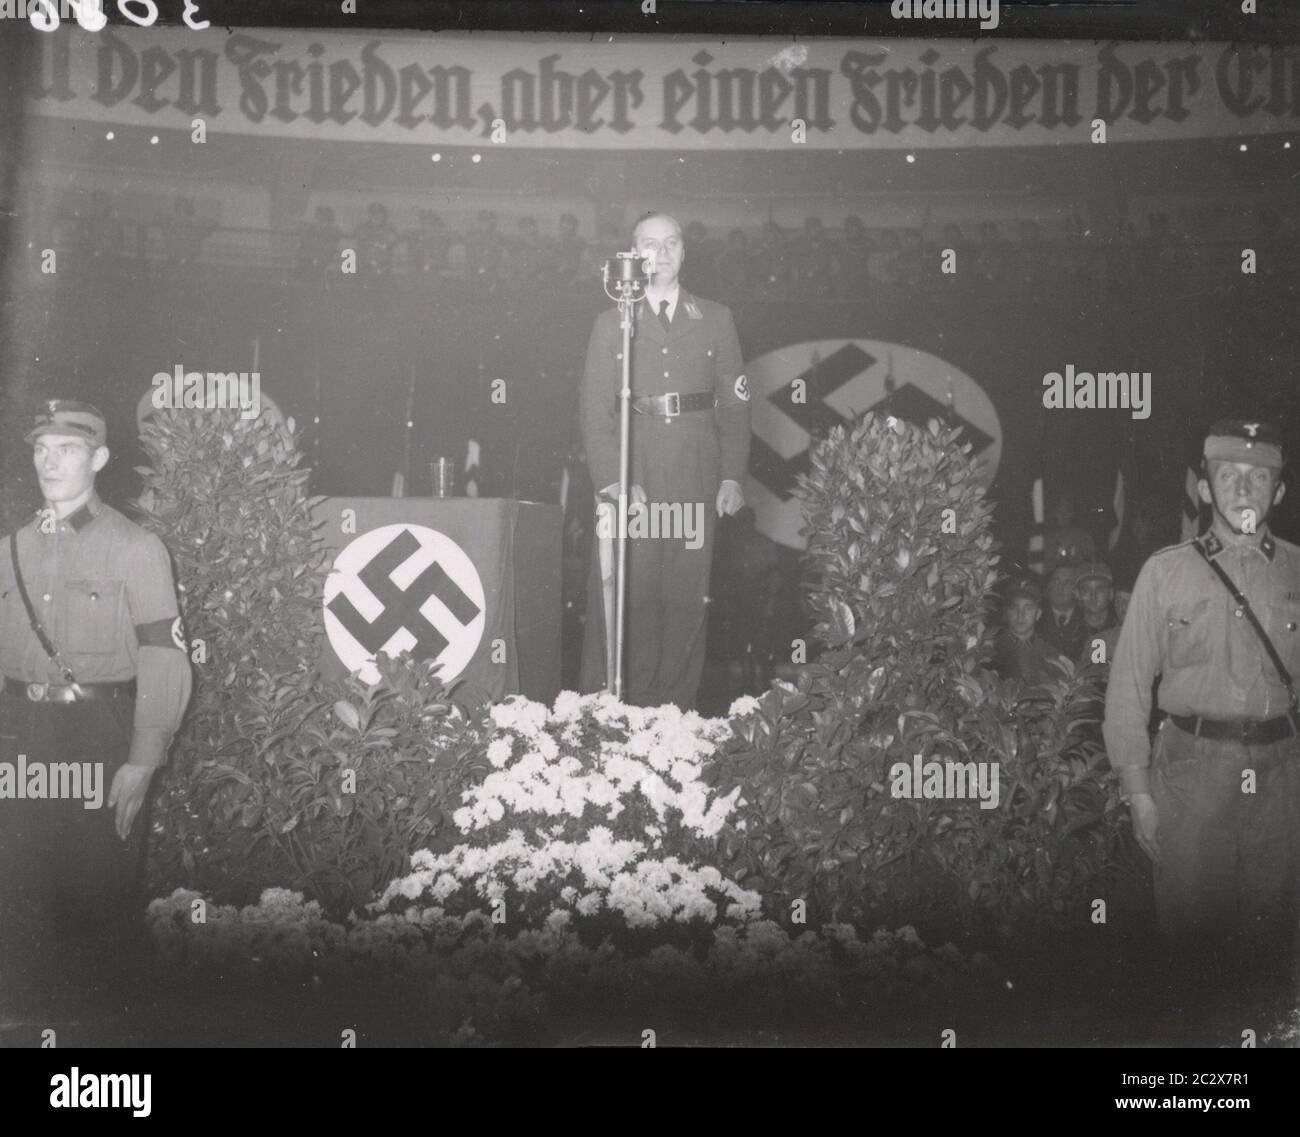 Rally with Alfred Rosenberg, Rosenberg speaks Heinrich Hoffmann Photographs 1933 Adolf Hitler's official photographer, and a Nazi politician and publisher, who was a member of Hitler's intimate circle. Stock Photo